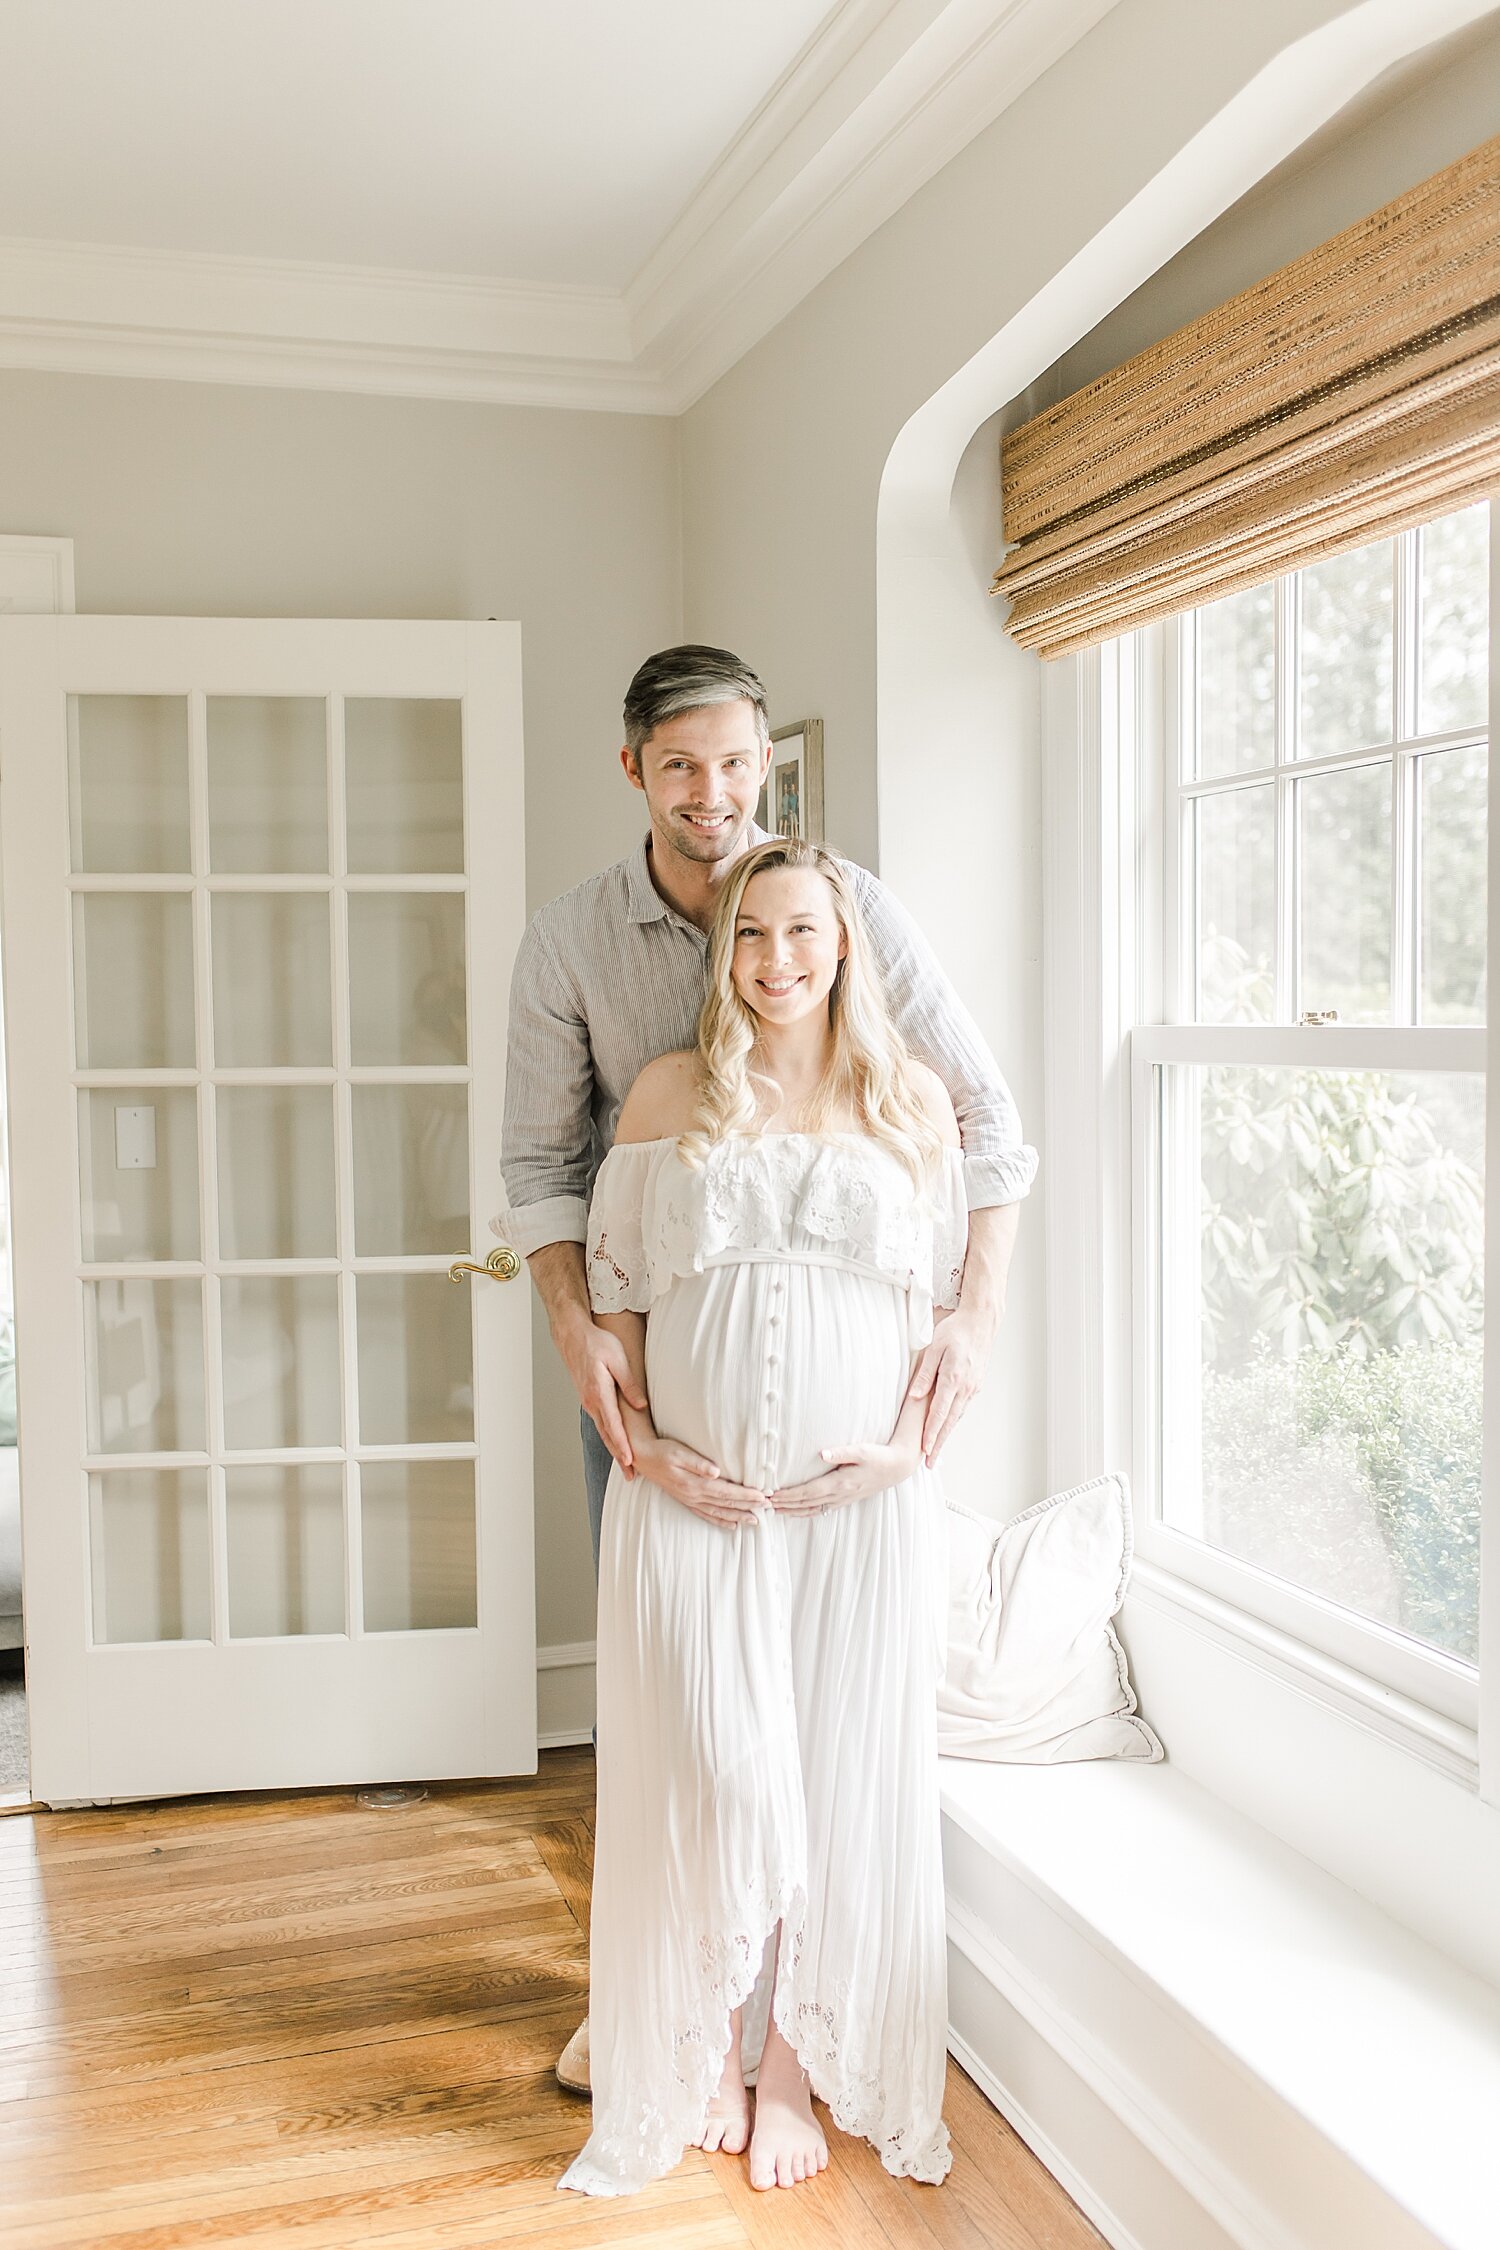 In-Home Maternity Photoshoot in Samford CT with Kristin Wood Photography.